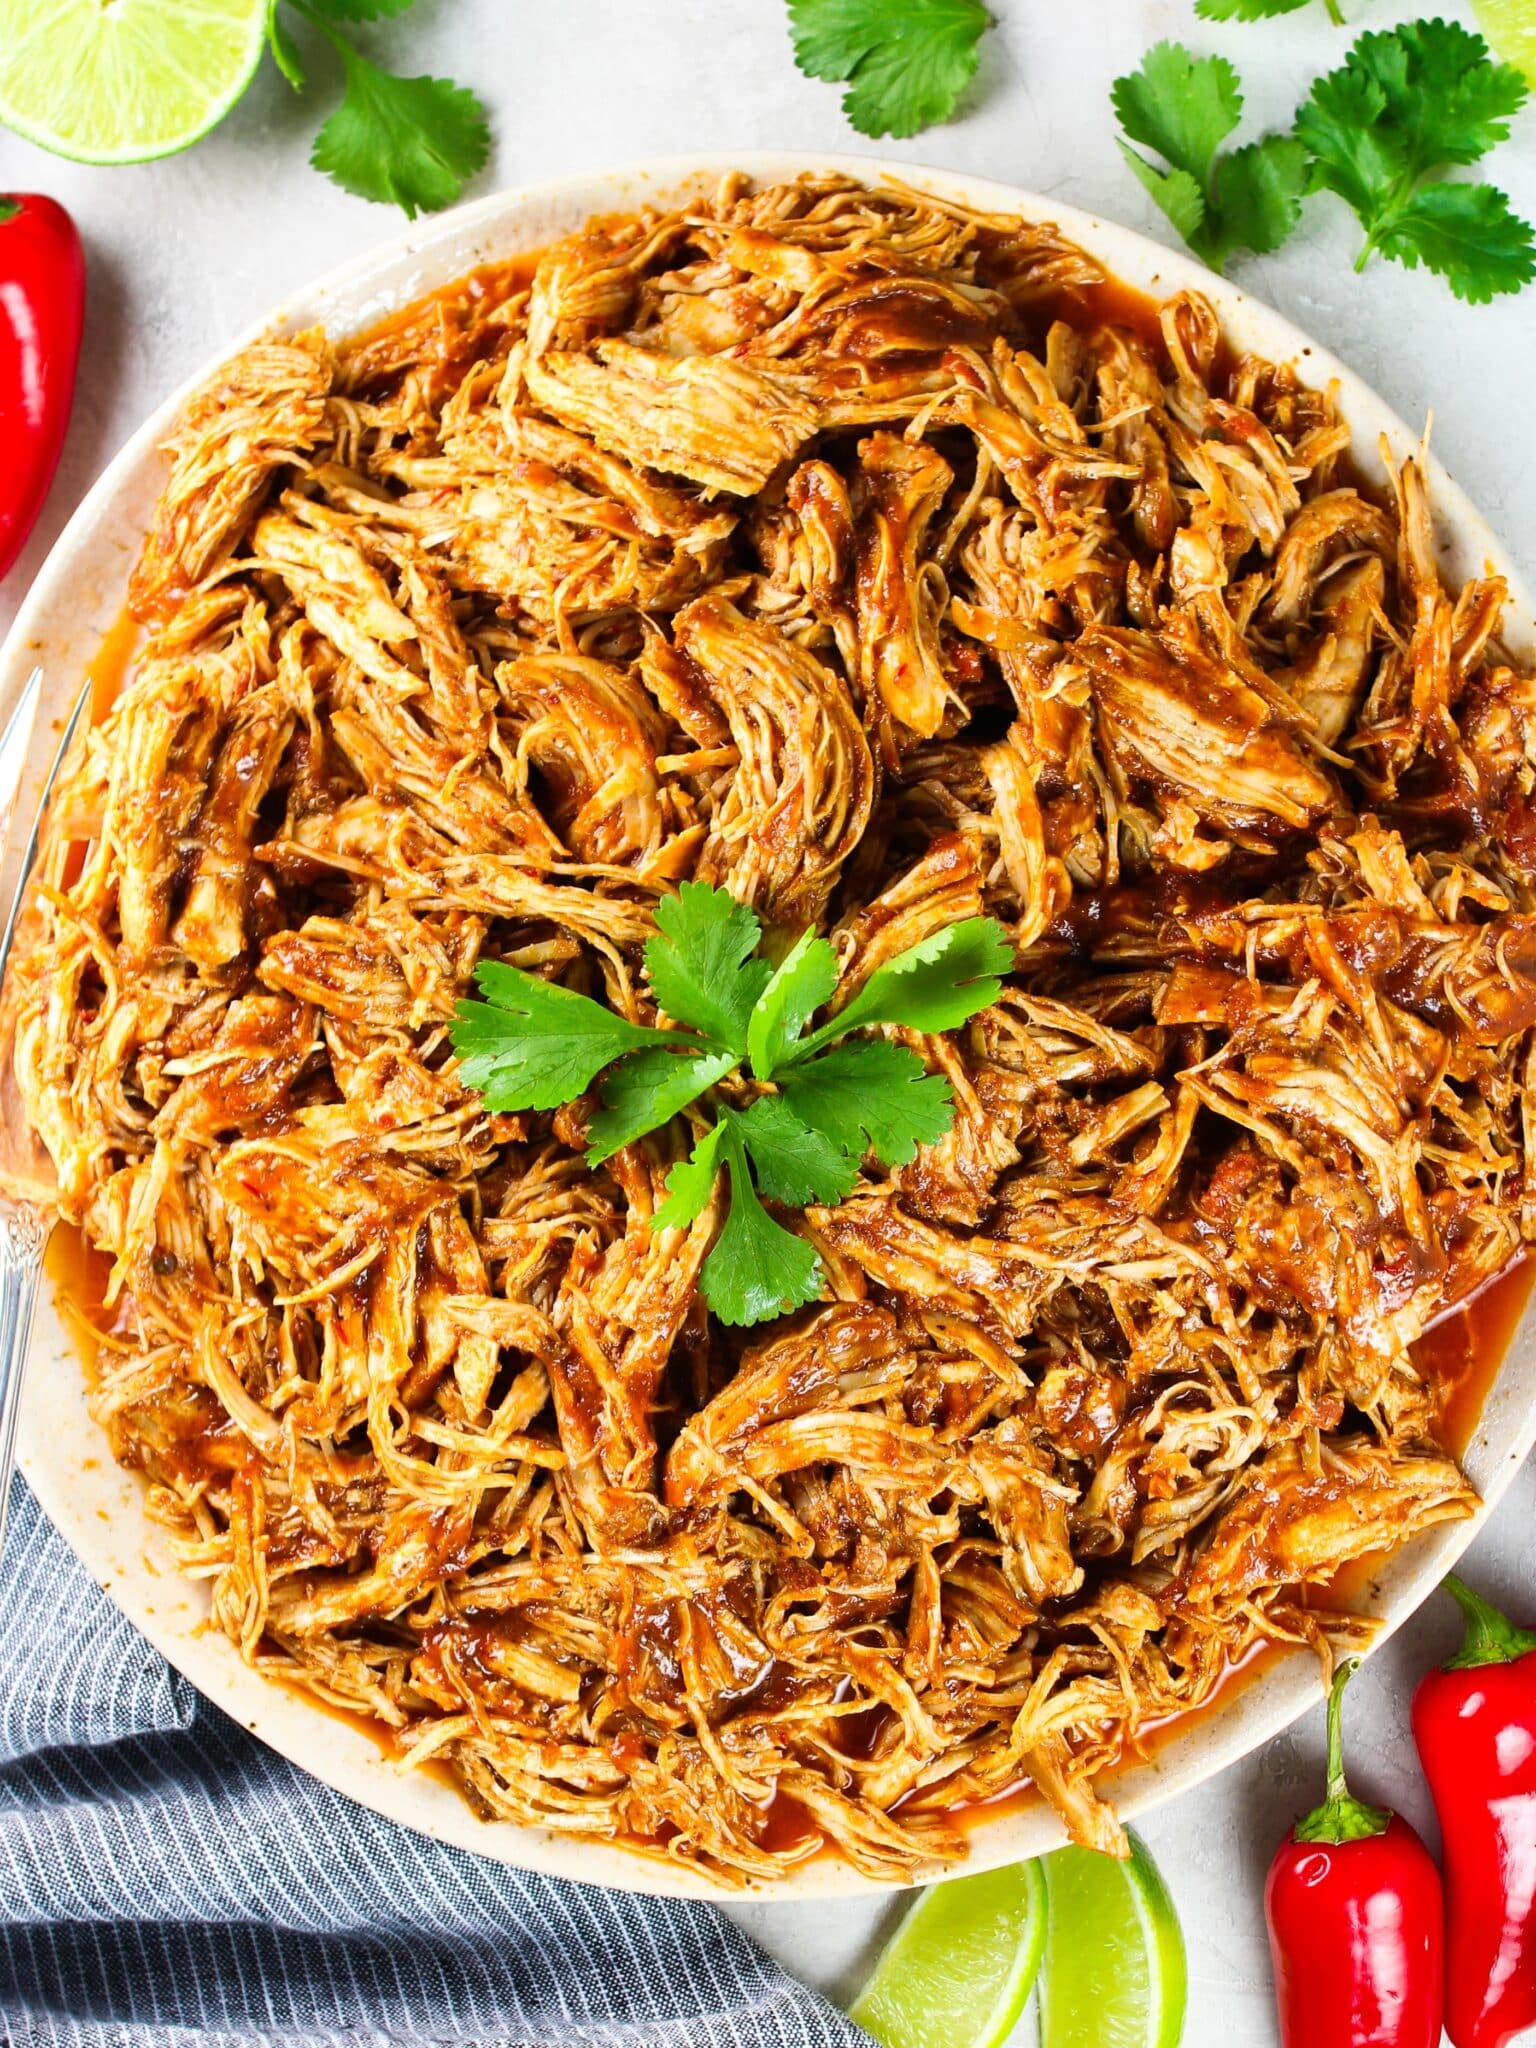 Shredded Mexican Chicken (Instant Pot + Slow Cooker) Full Plate of Chicken Over Top